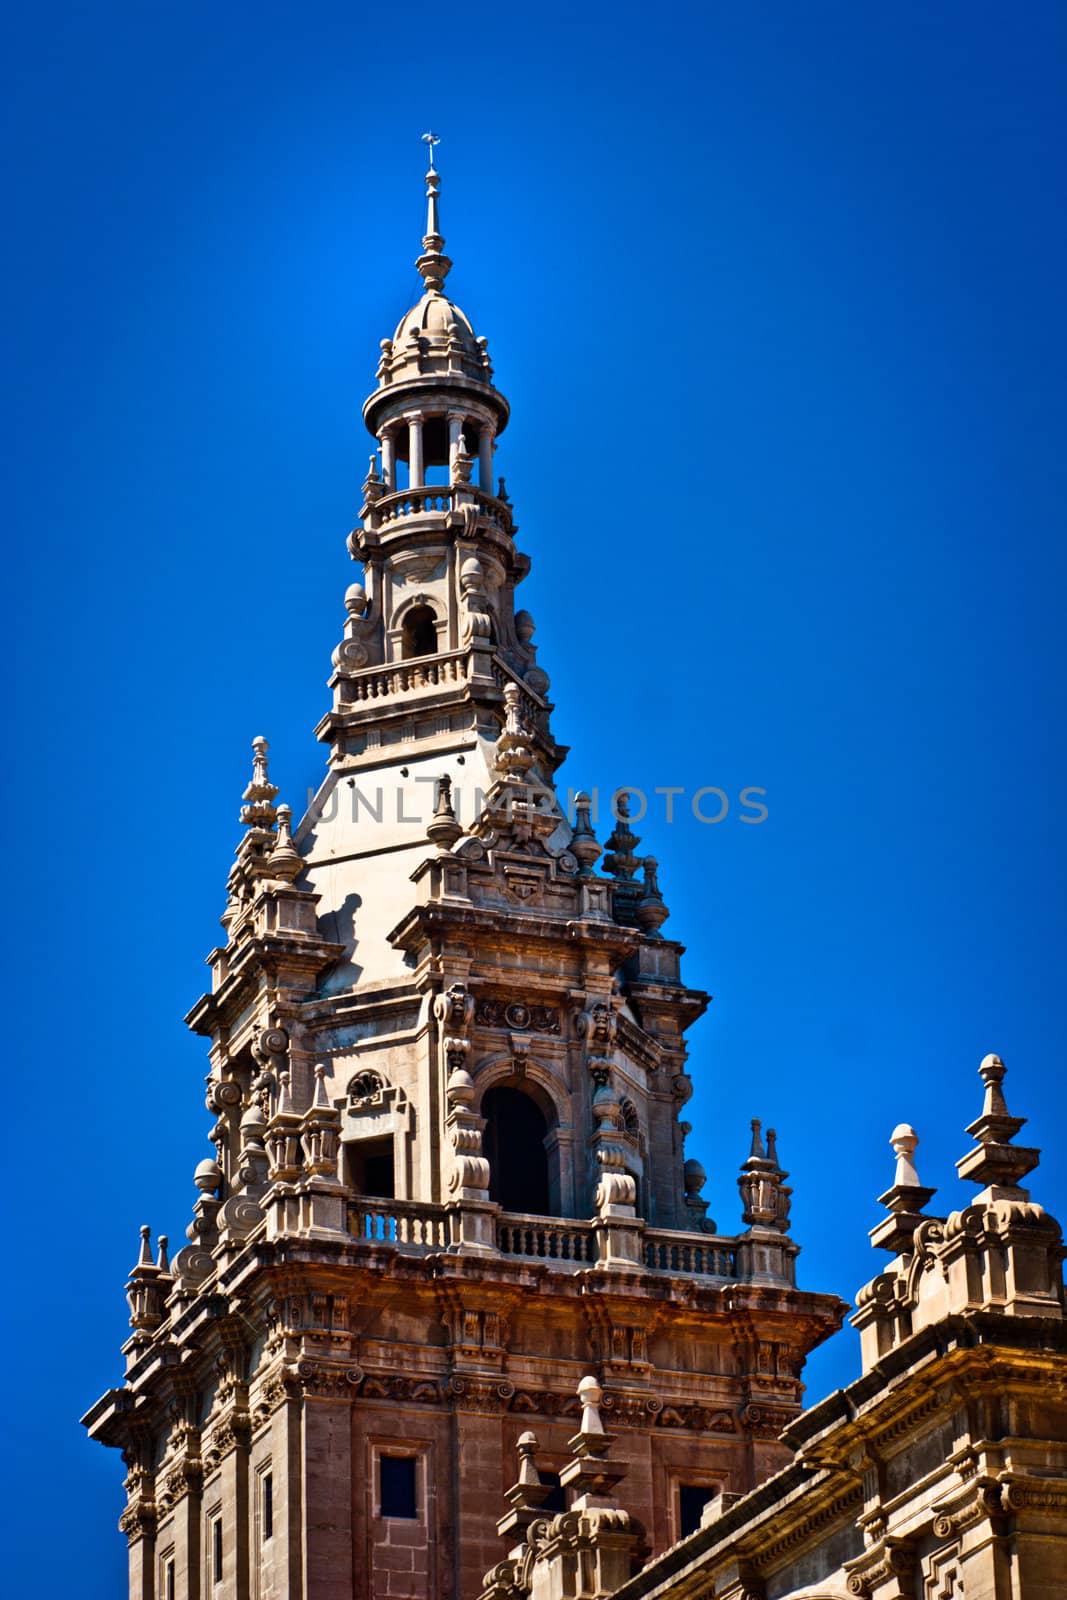 Photograpph of beautiful Spanish architecture of a building in Barcelona, Spain.